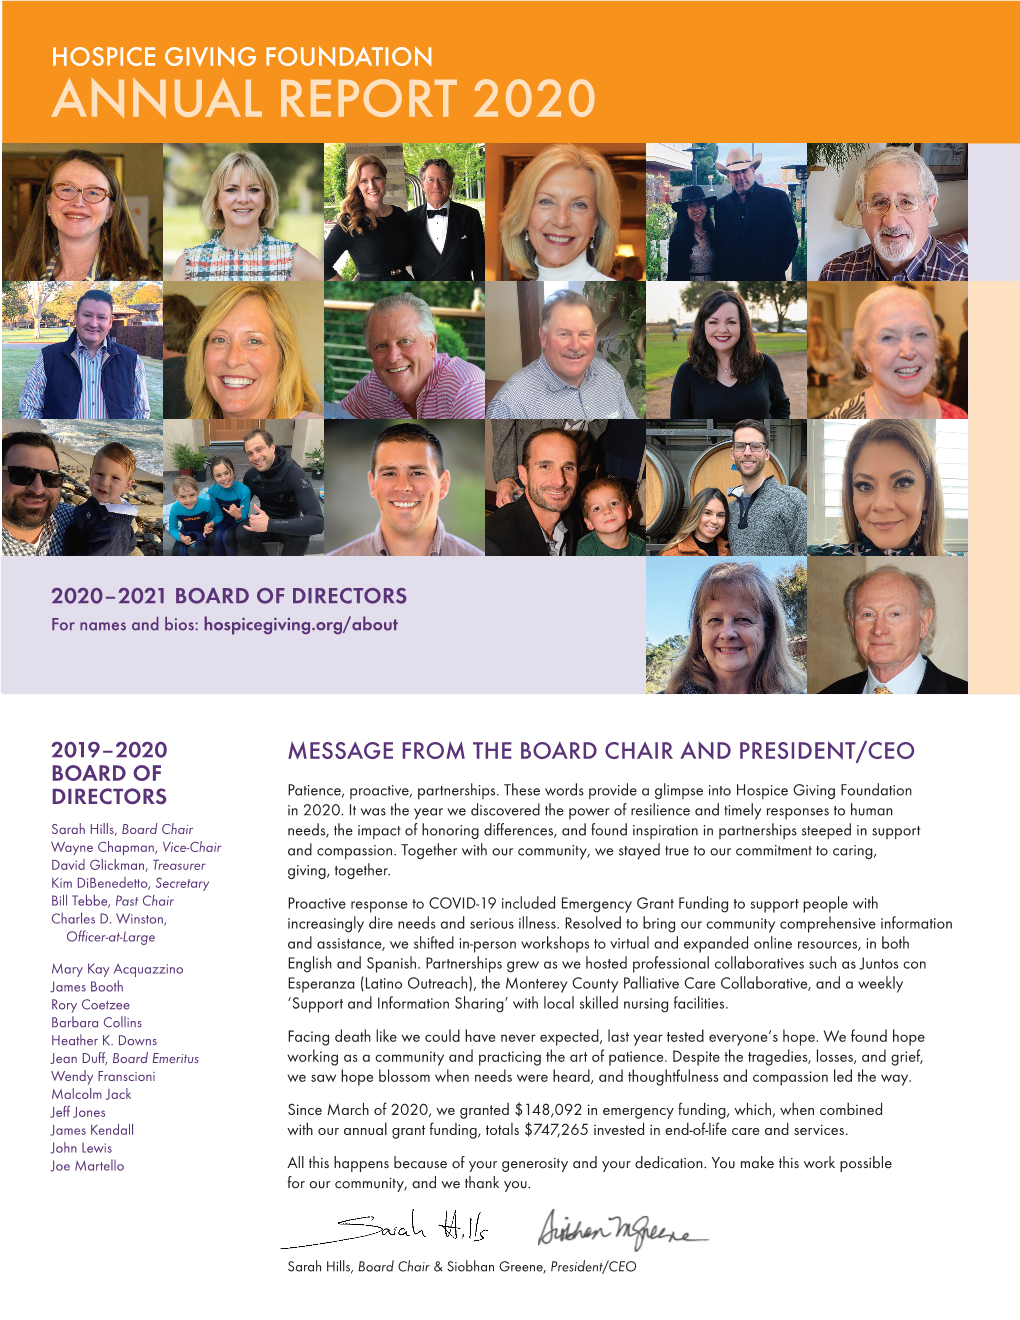 Hospice Giving Foundation Annual Report 2020